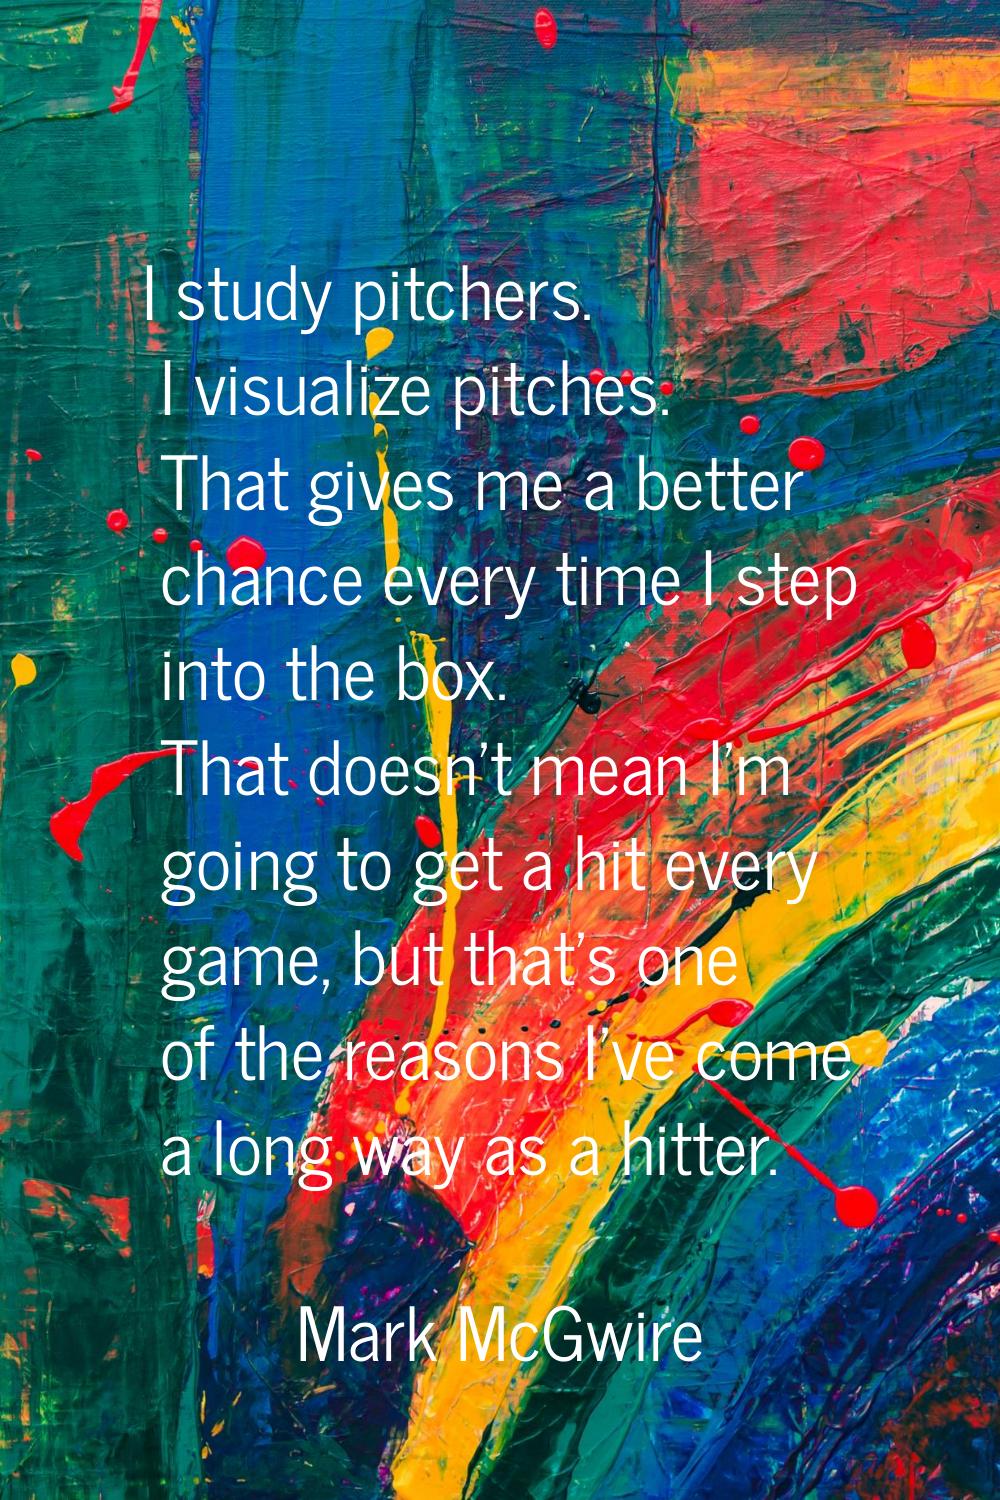 I study pitchers. I visualize pitches. That gives me a better chance every time I step into the box